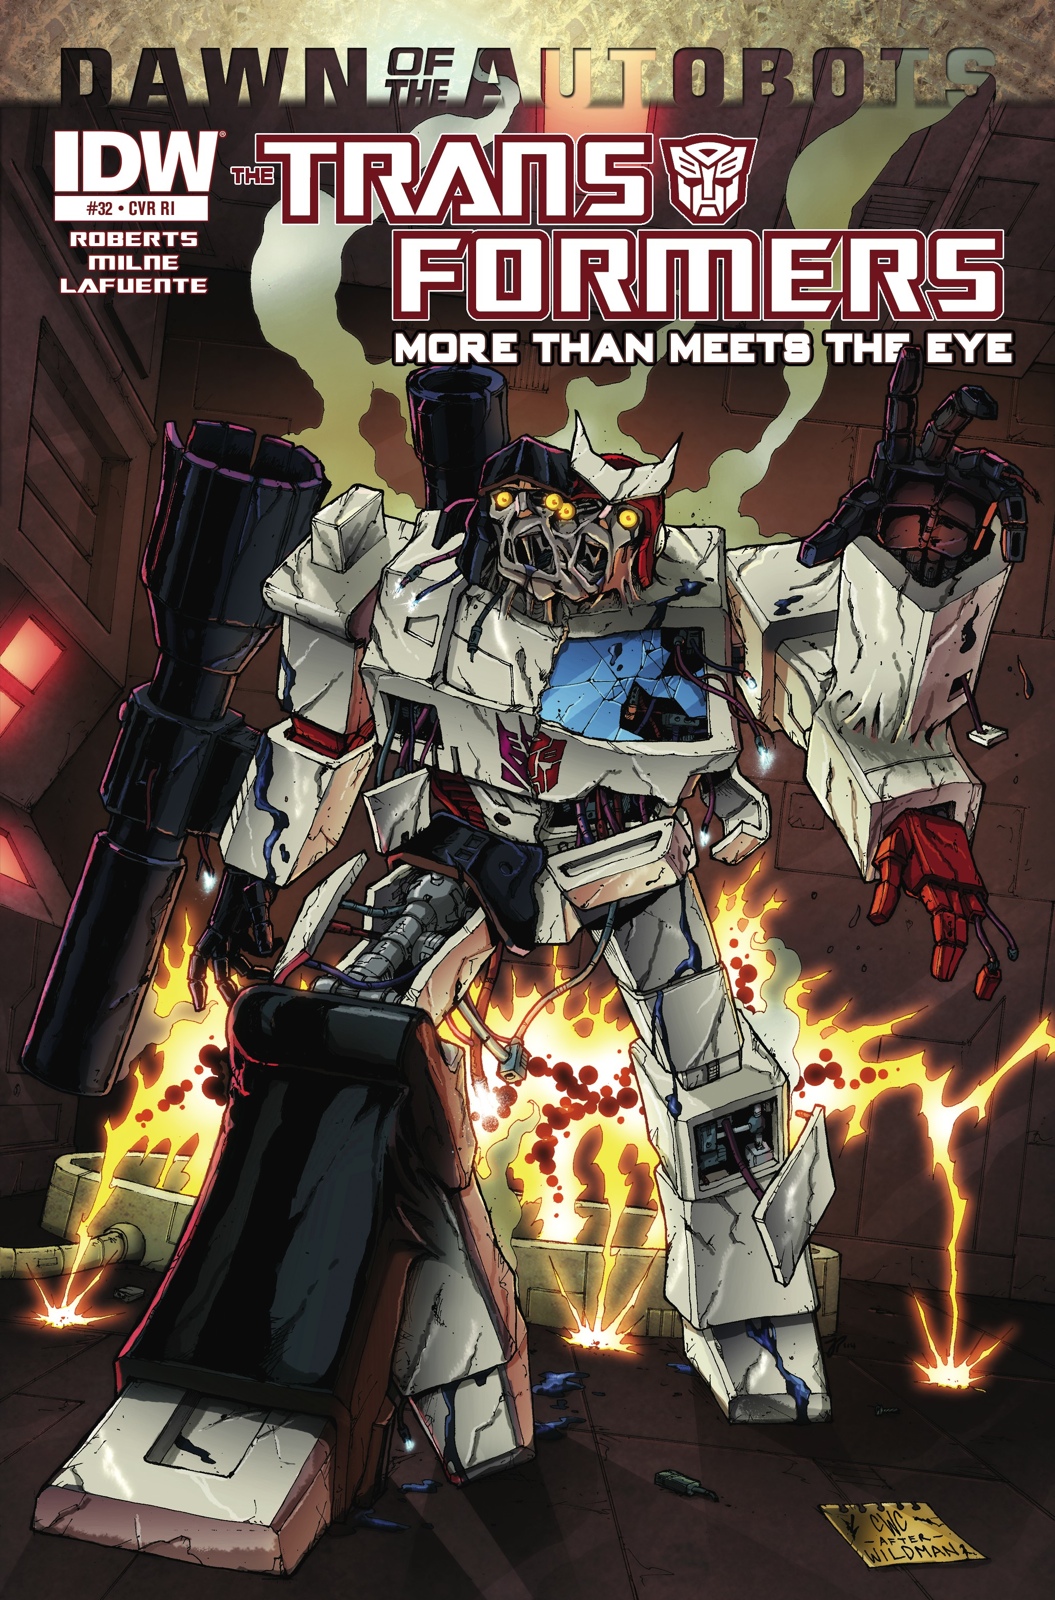 IDW Transformers: More Than Meets the Eye #32 Variant Covers Revealed